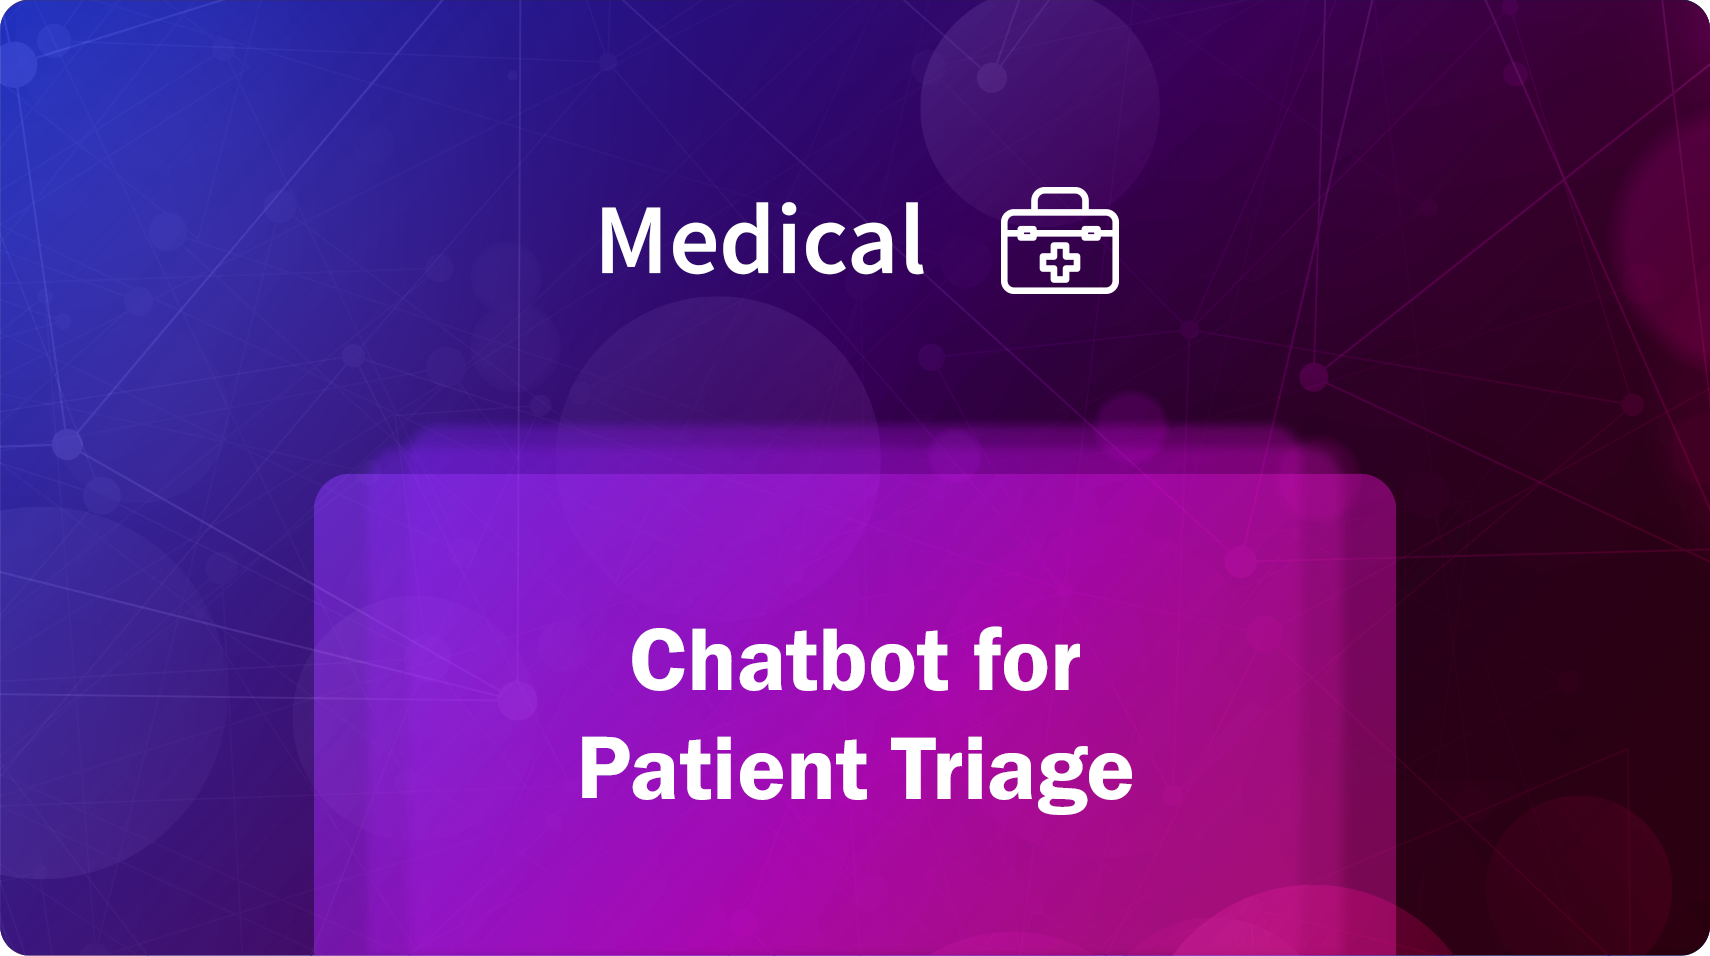 Chatbot for Patient Triage